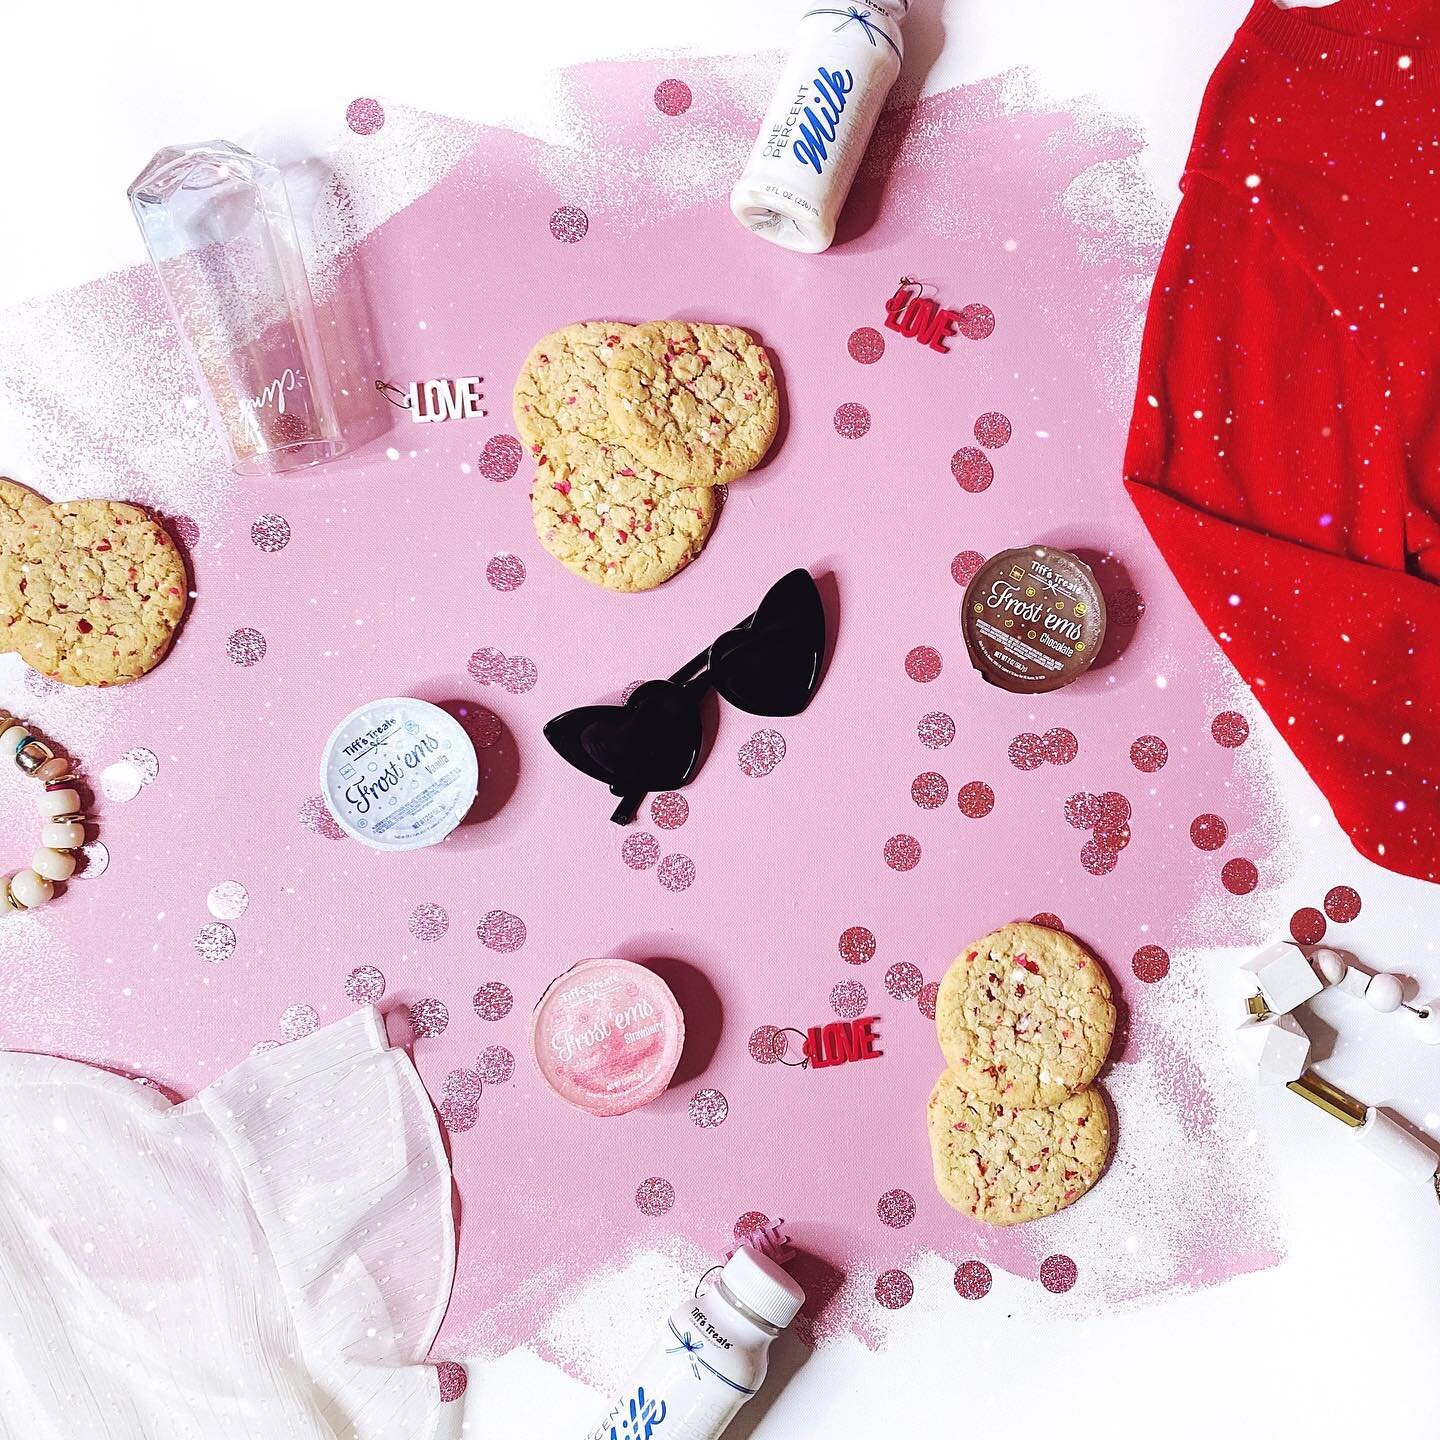 to my #NASHVILLE GALS, as Leslie Knope says, &lsquo;I like you and I love you.&rdquo; ❤️ And to celebrate Galentine&rsquo;s day, I want to treat you &amp; your BFF to some @tiffstreats goodies!🍪

Whether you&rsquo;re dressing up to celebrate togethe